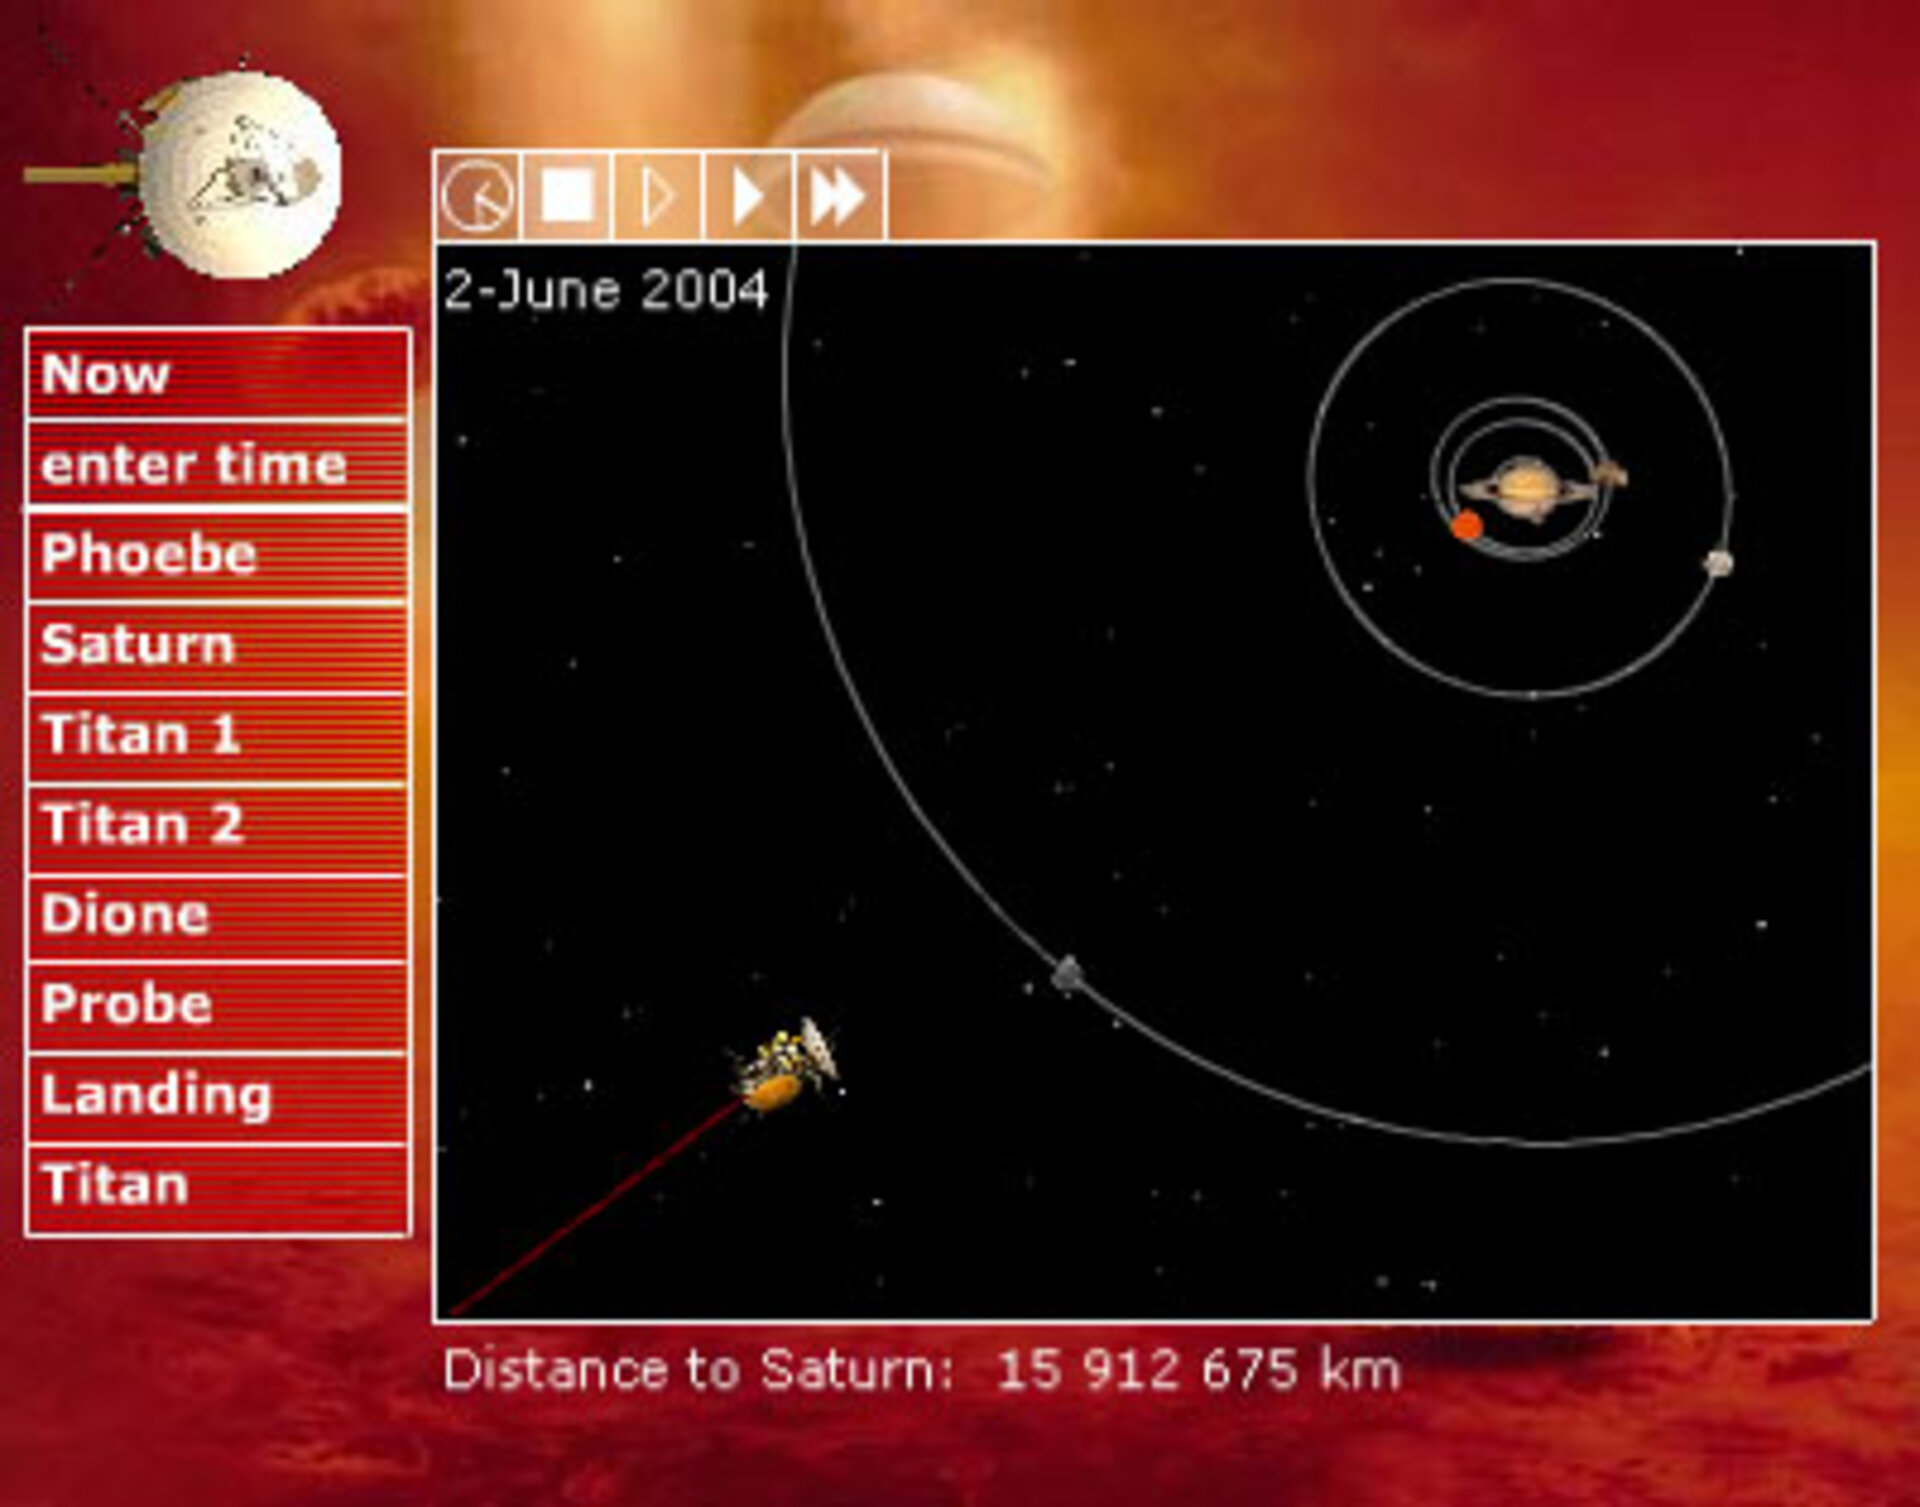 Position of Cassini and Huygens